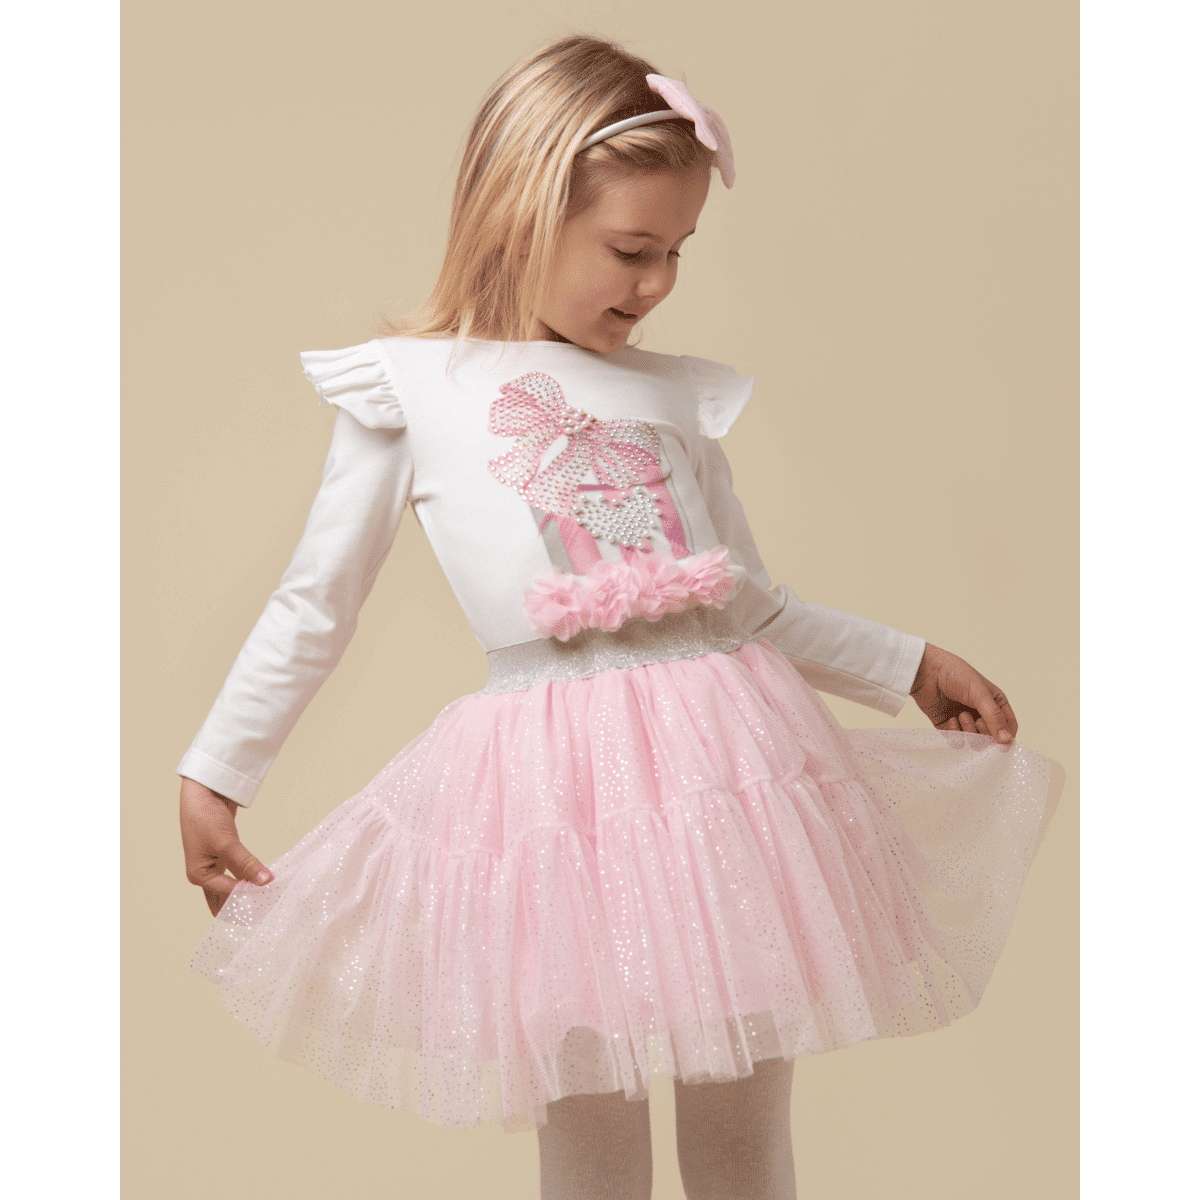 Caramelo fairy tulle skirt in pink